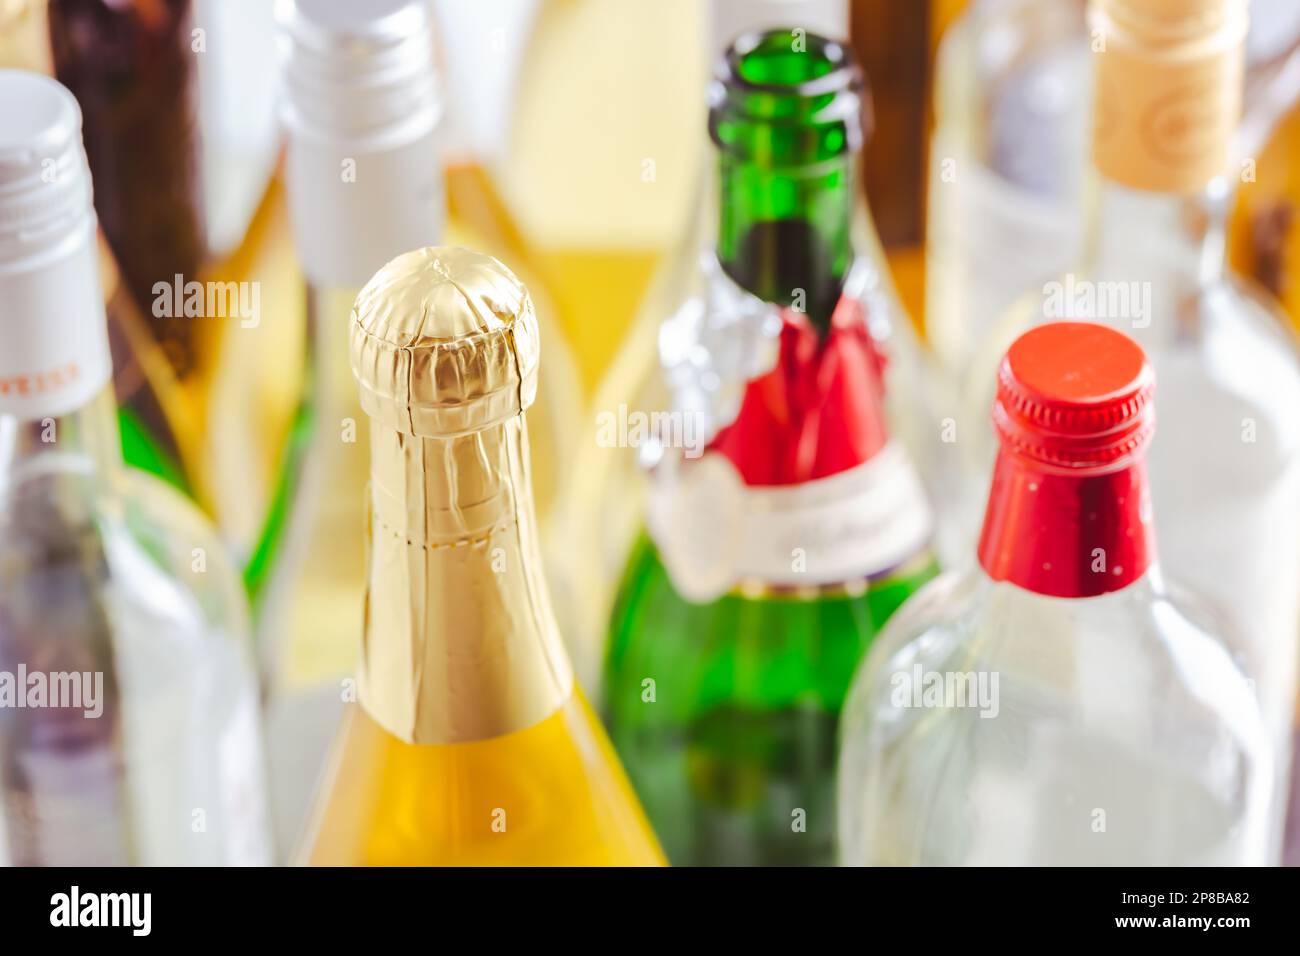 Full and empty bottles of different alcoholic drinks, abuse and alcohol addiction. Alcoholism concept. Stock Photo